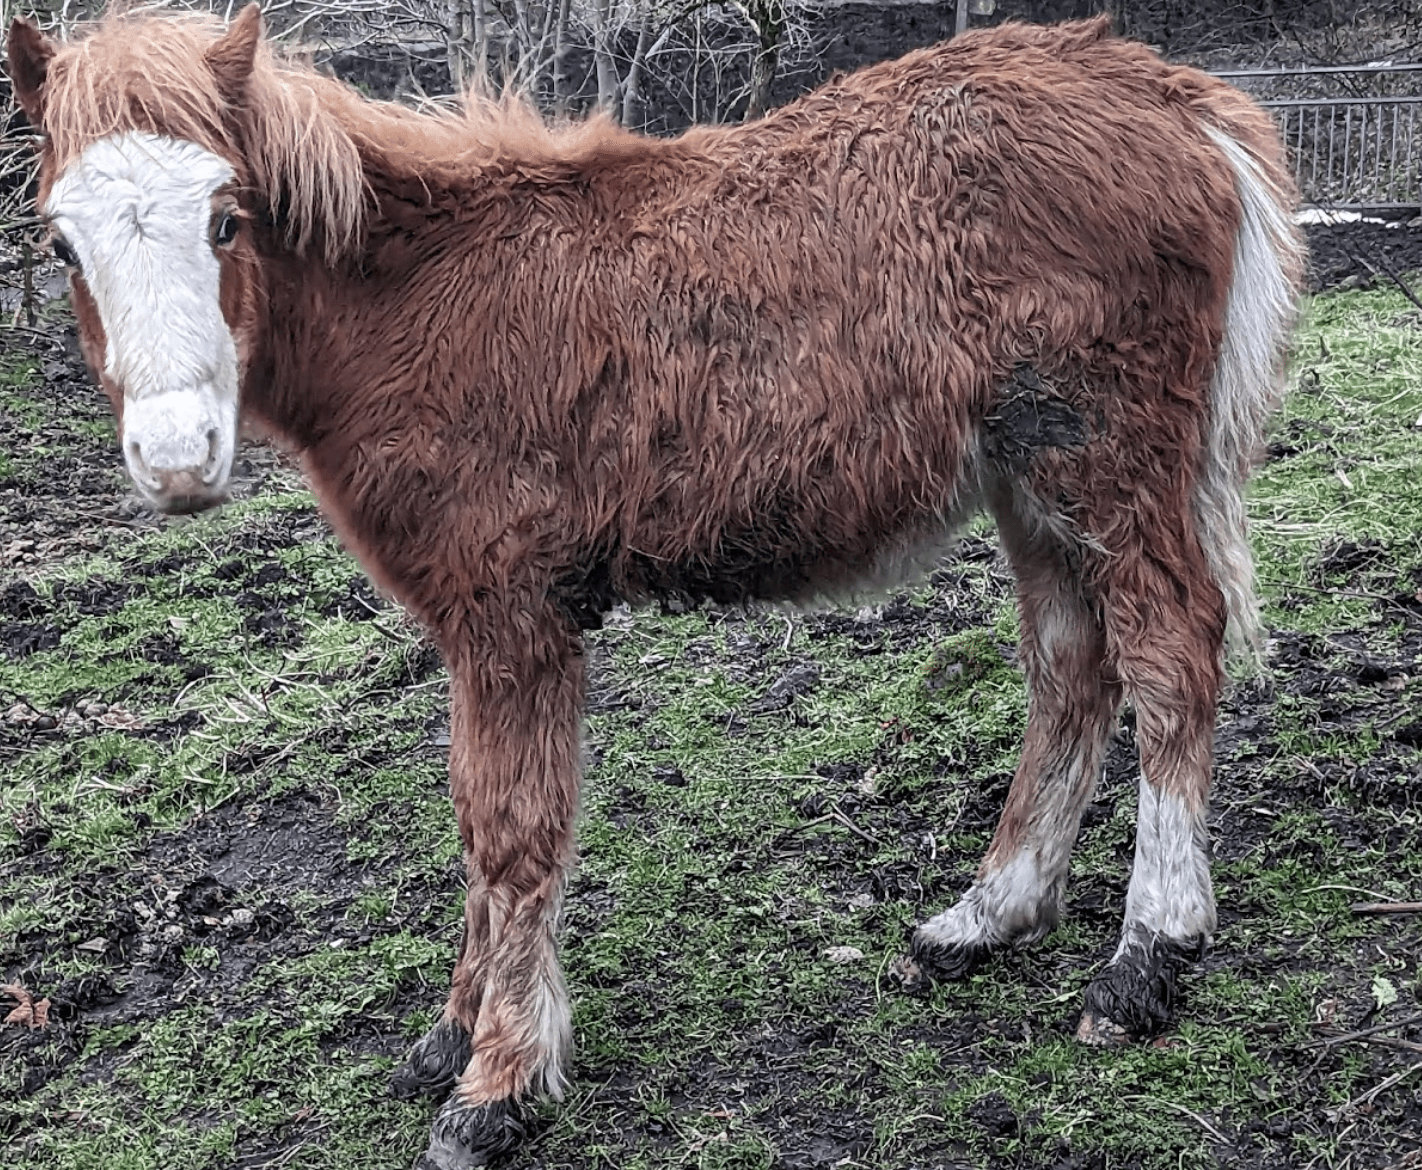 Foal found in poor conditions in Nantyglo